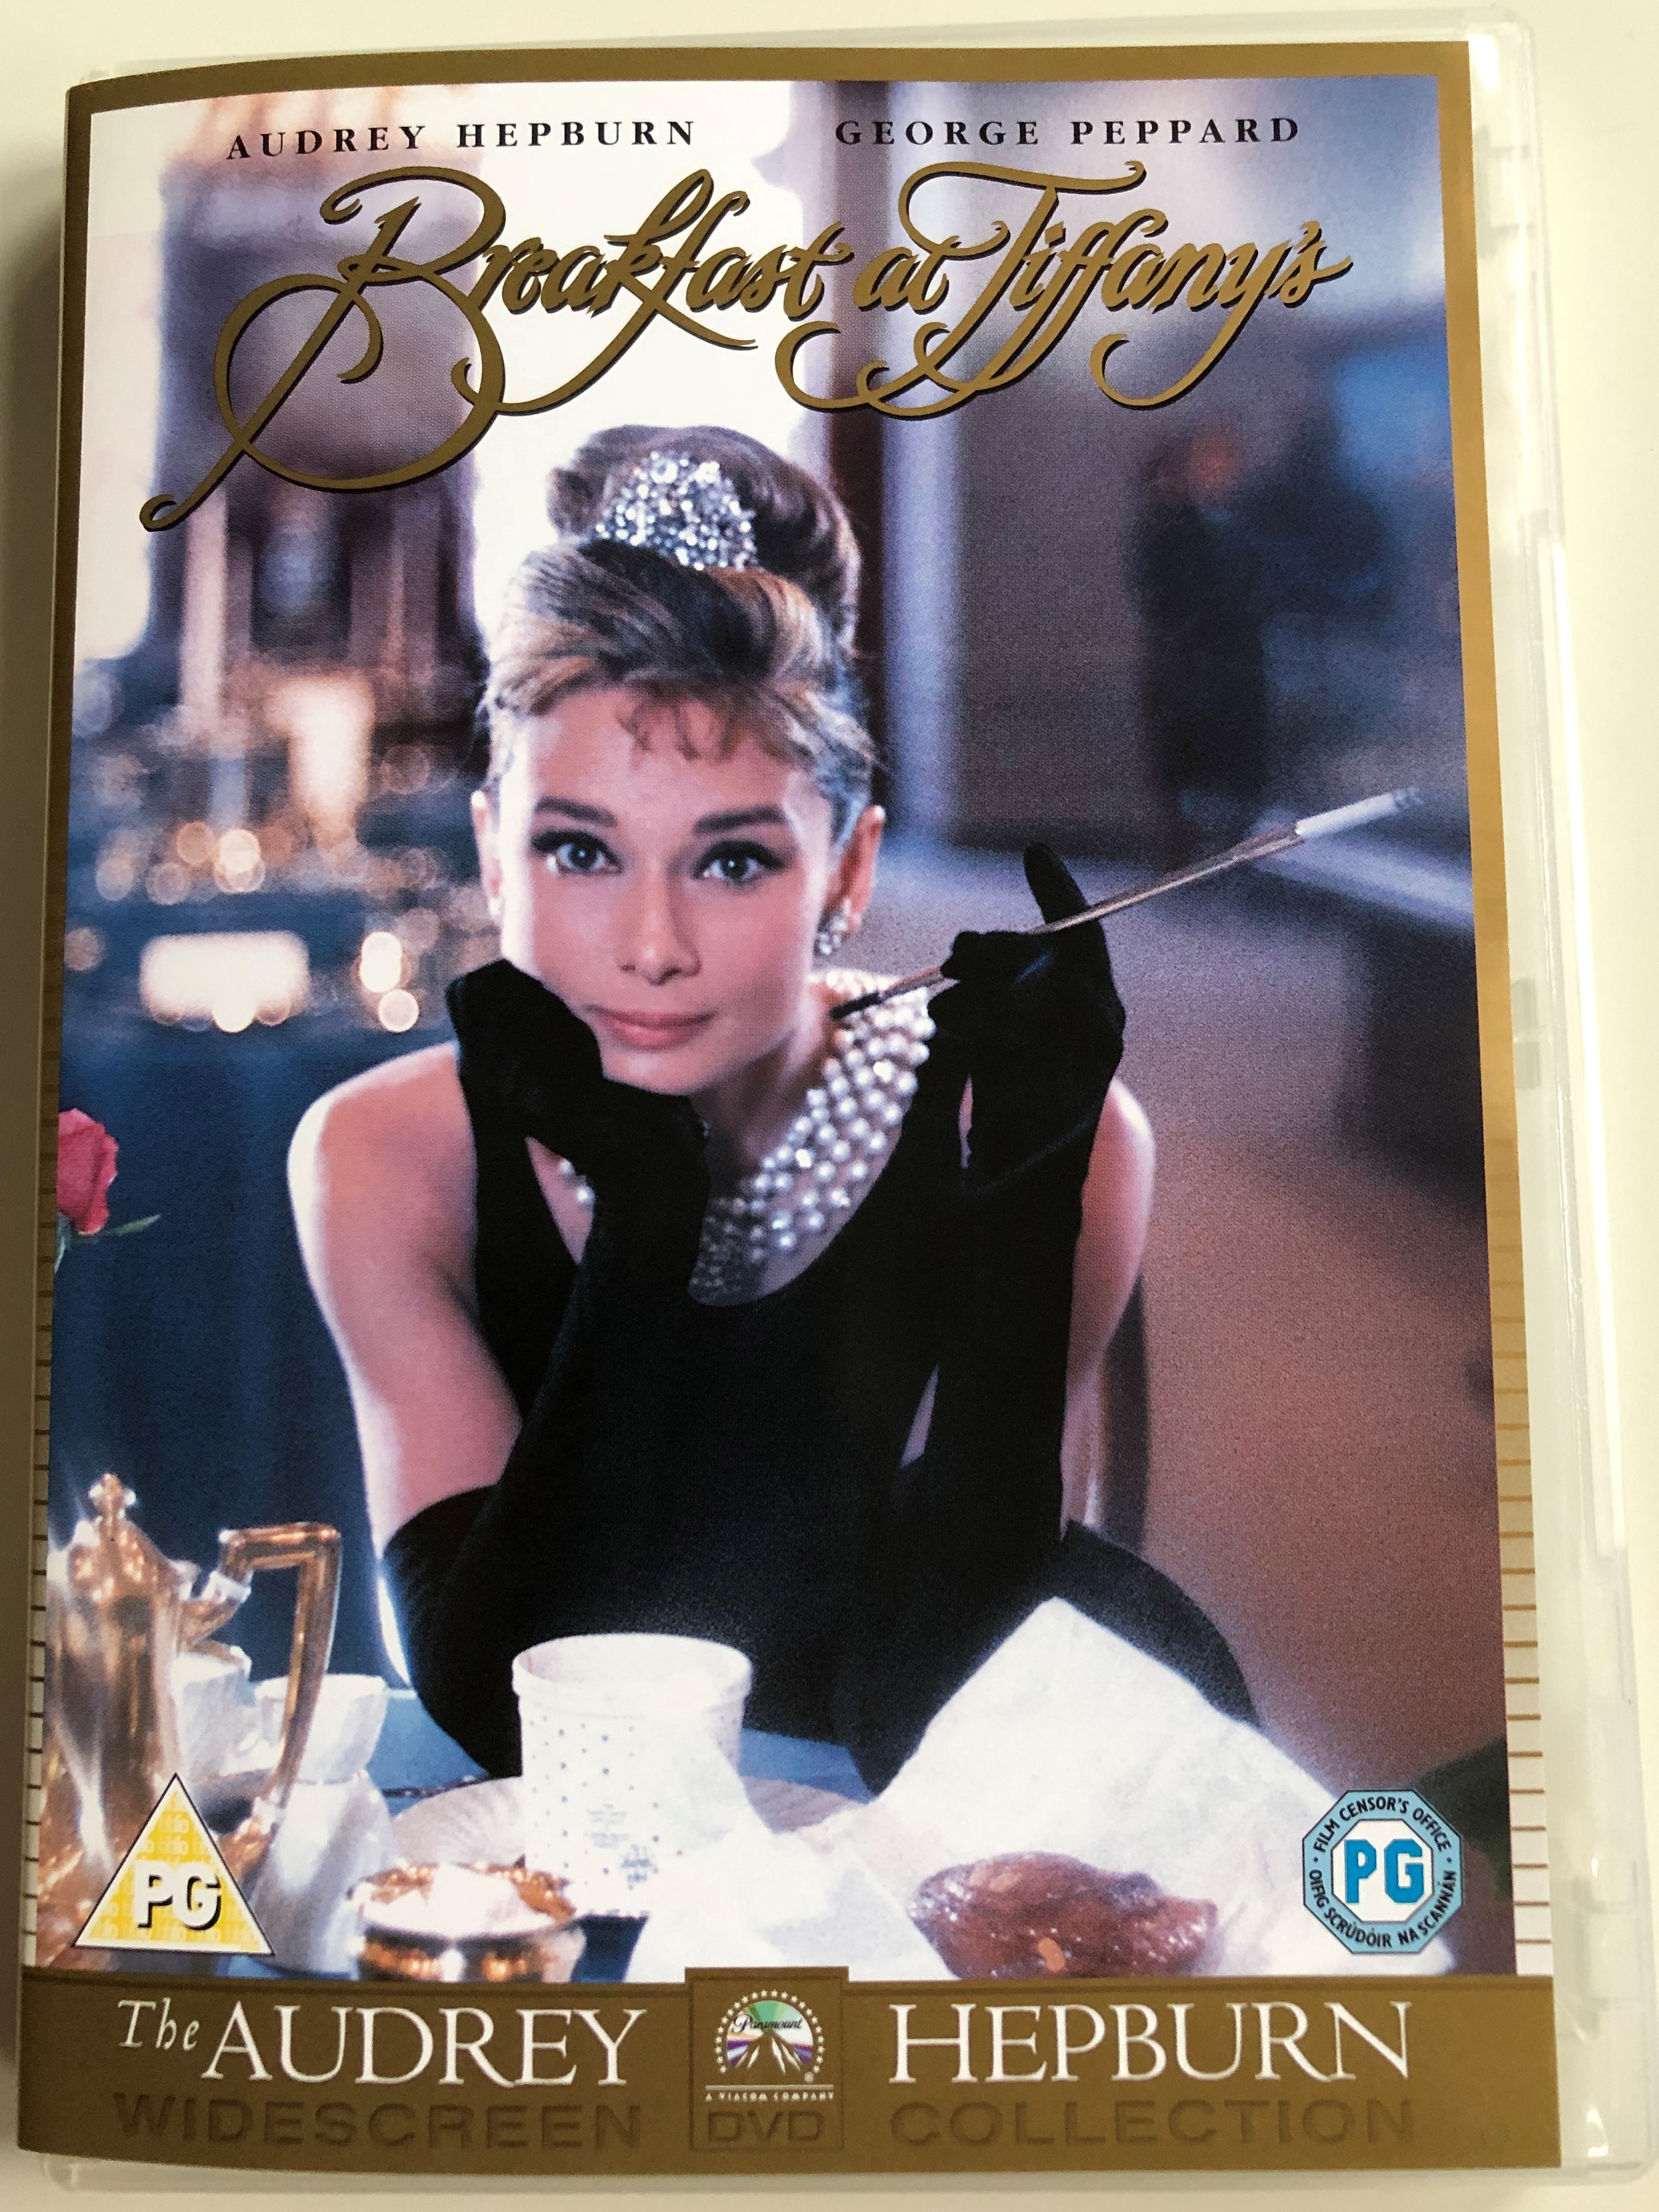 Breakfast at Tiffany's DVD 1961 / Directed by Blake Edwards / Starring: Audrey  Hepburn, George Peppard / The Audrey Hepburn Collection - bibleinmylanguage